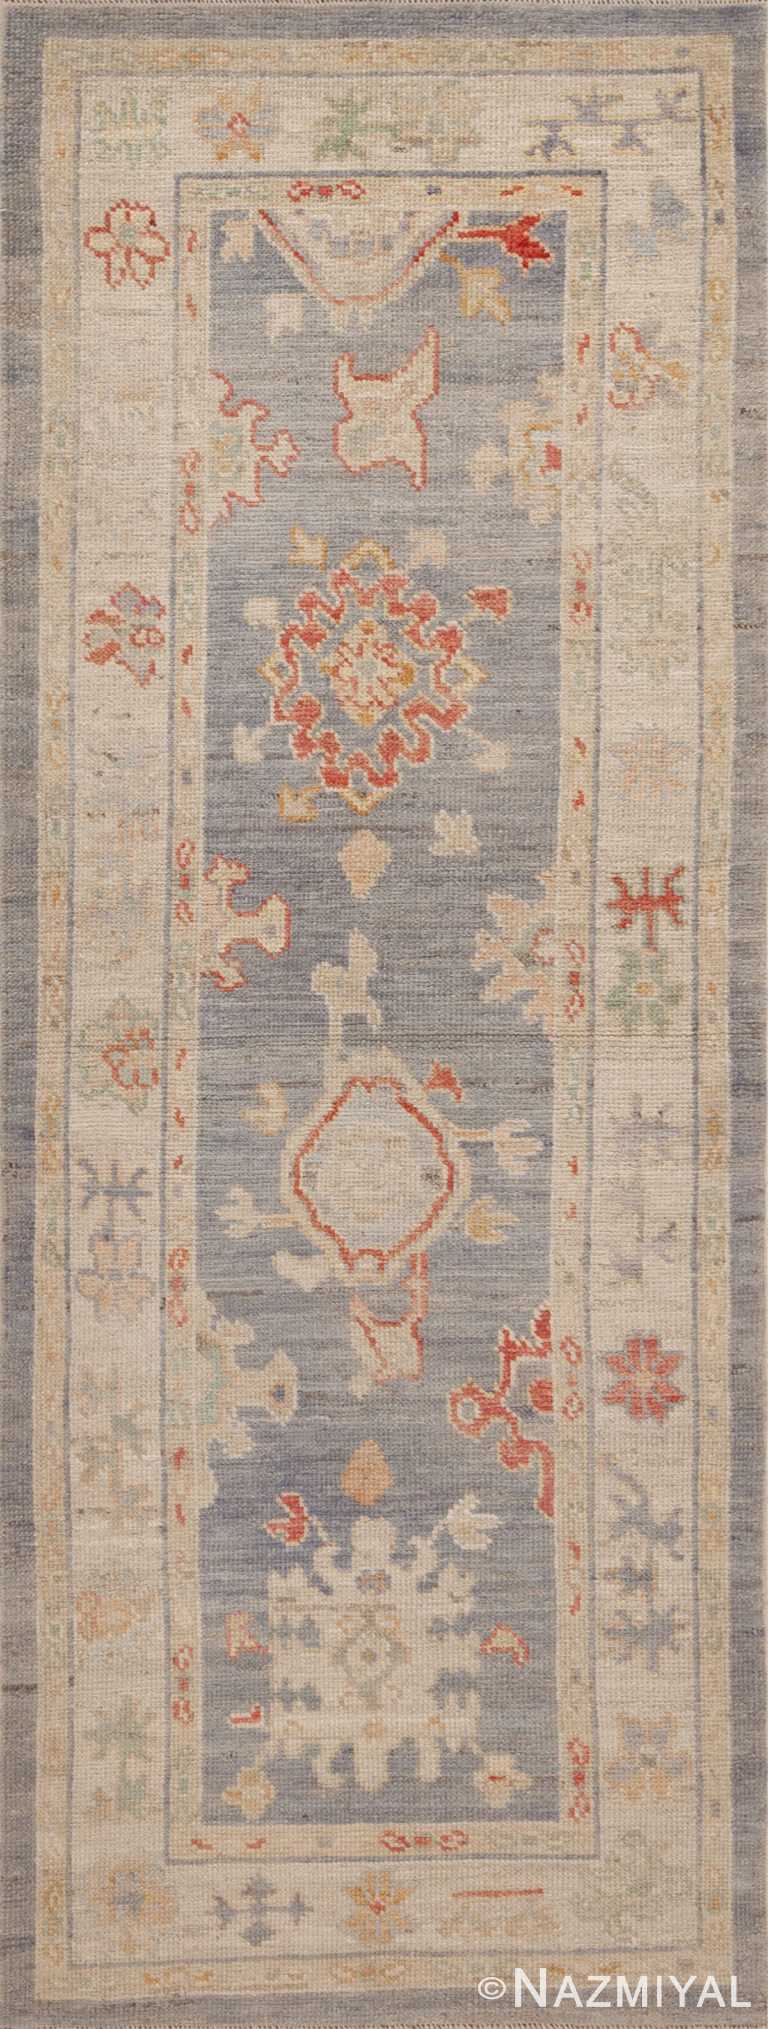 A Magnificently Decorative and Artistic Rustic Pastel Color Tribal Modern Turkish Oushak Design Short Runner Rug 11192 by Nazmiyal Antique Rugs